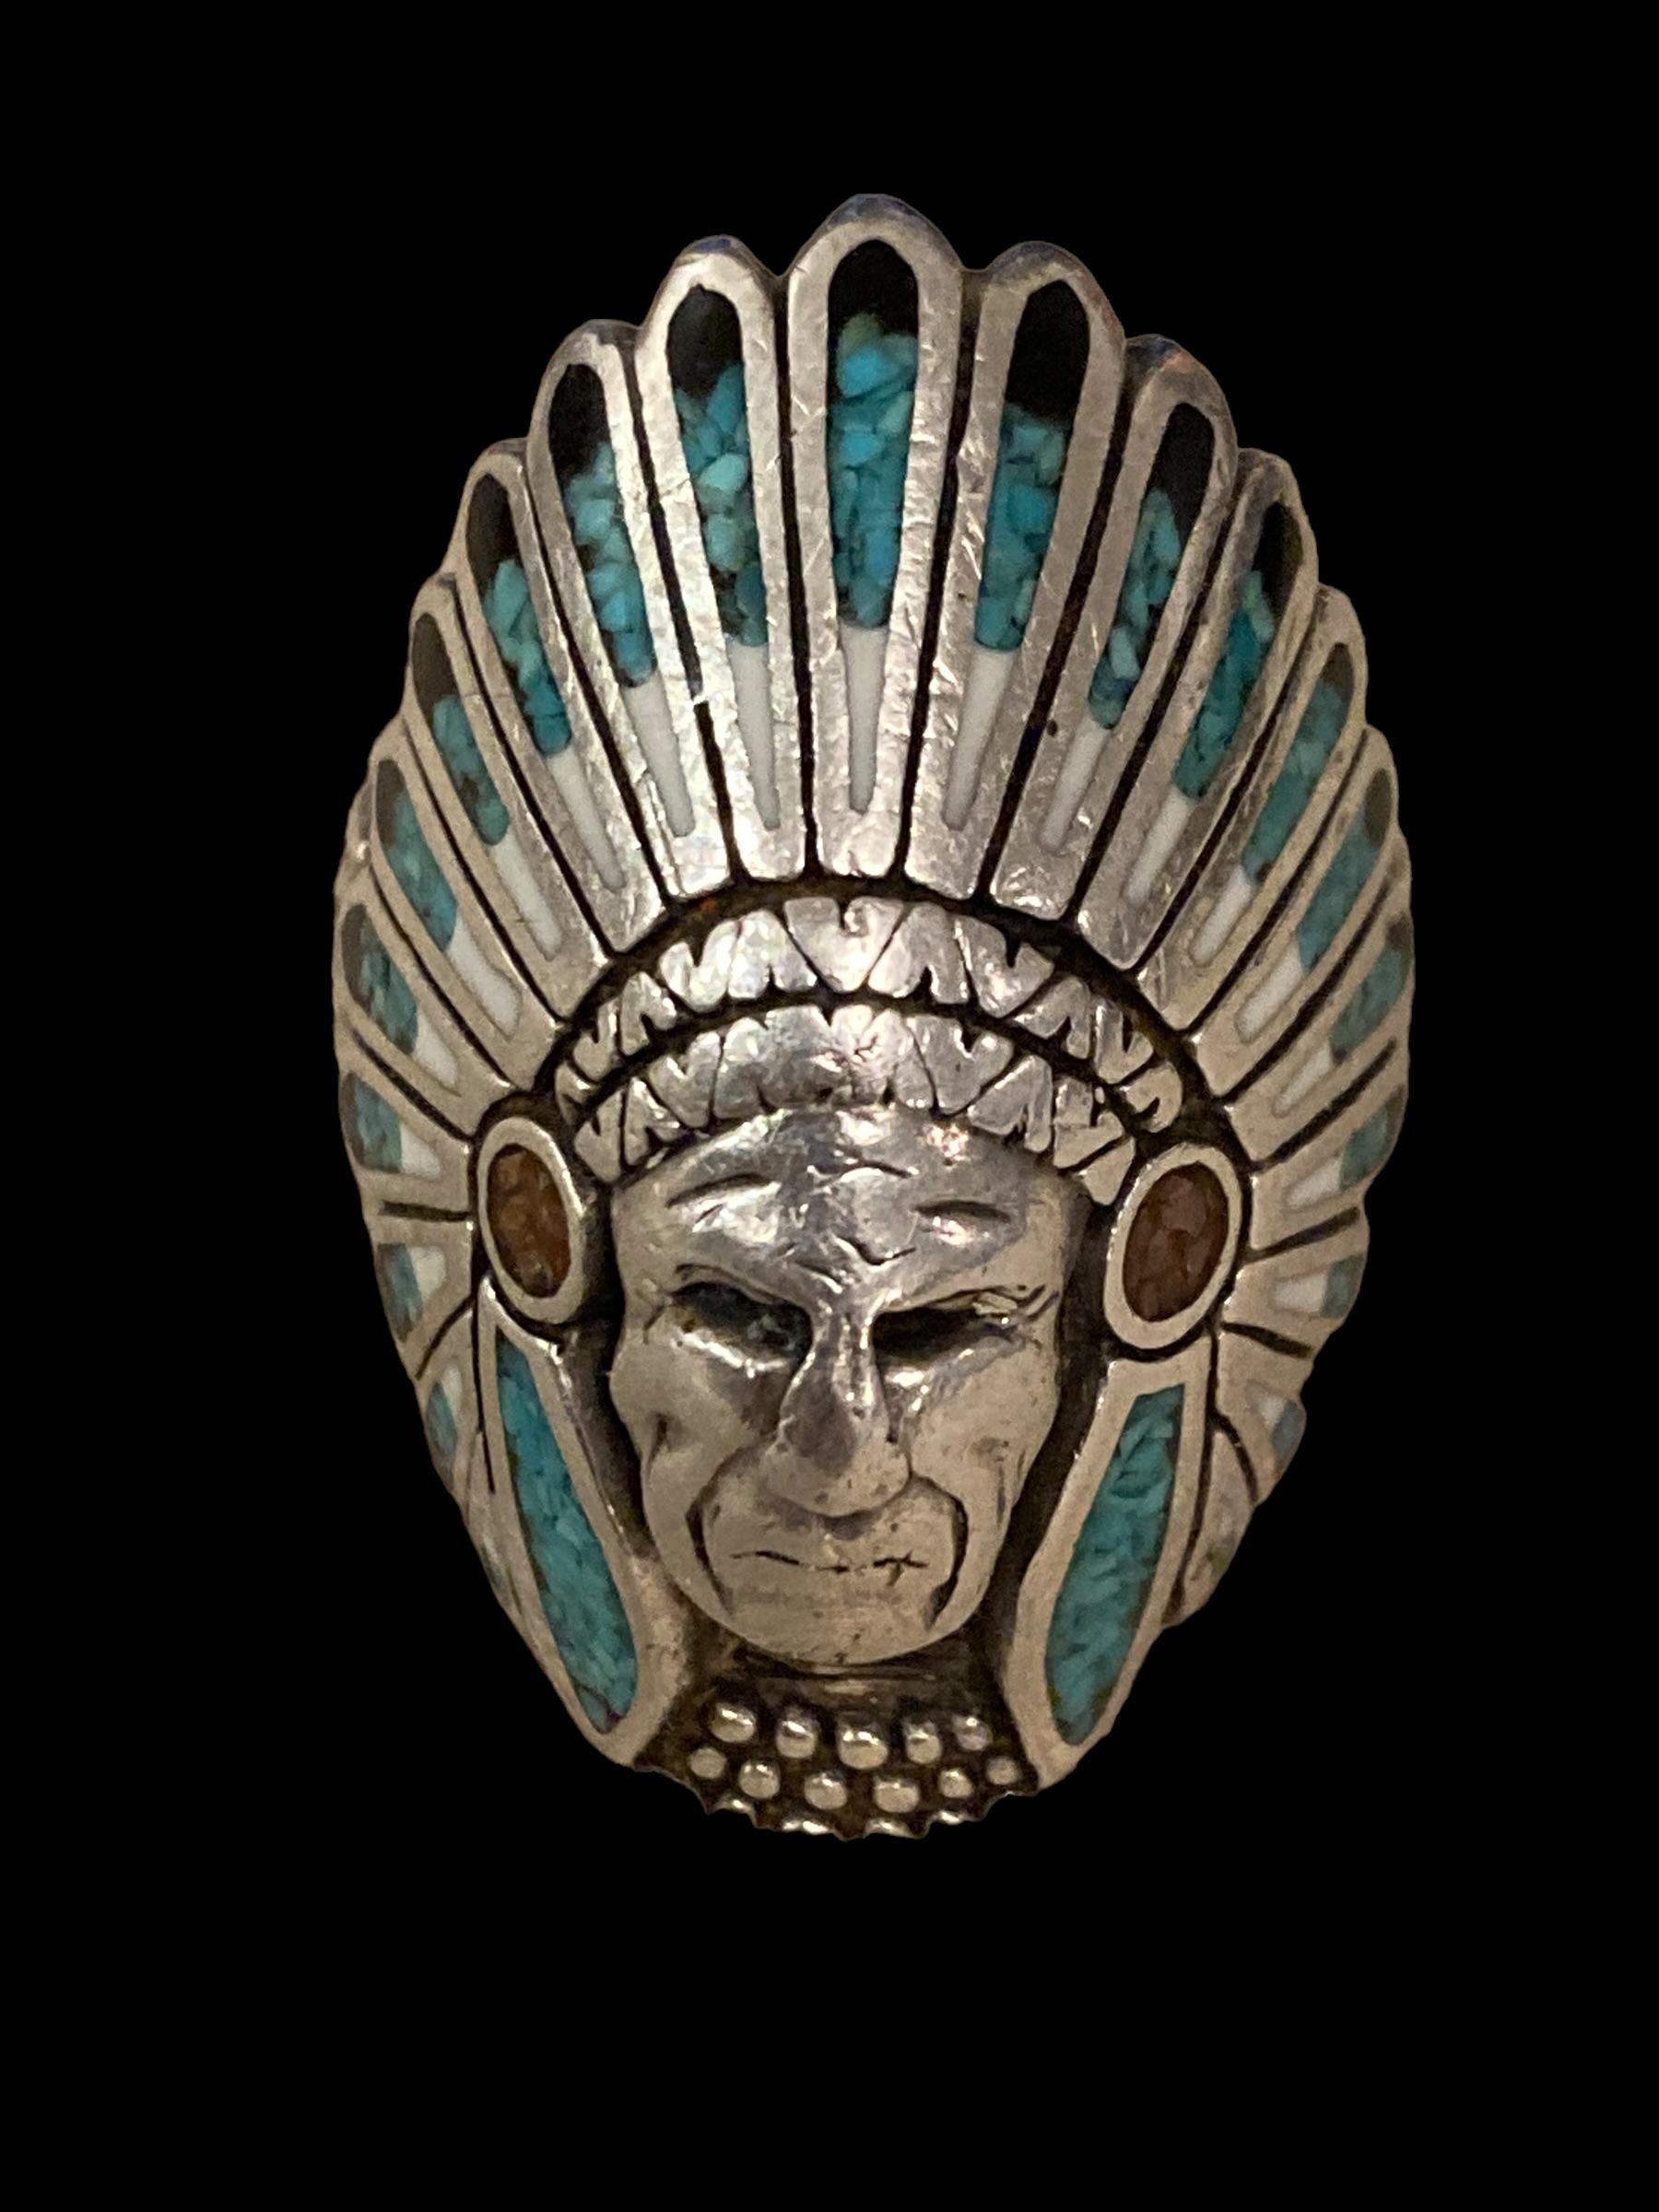 This Navajo Native American Indian Chief Sterling Silver Turquoise Ring boasts incredible detail all around, but the face tells the whole story. I see rings of this type on a weekly basis but hadn't before seen one as proud, brave and poignant as